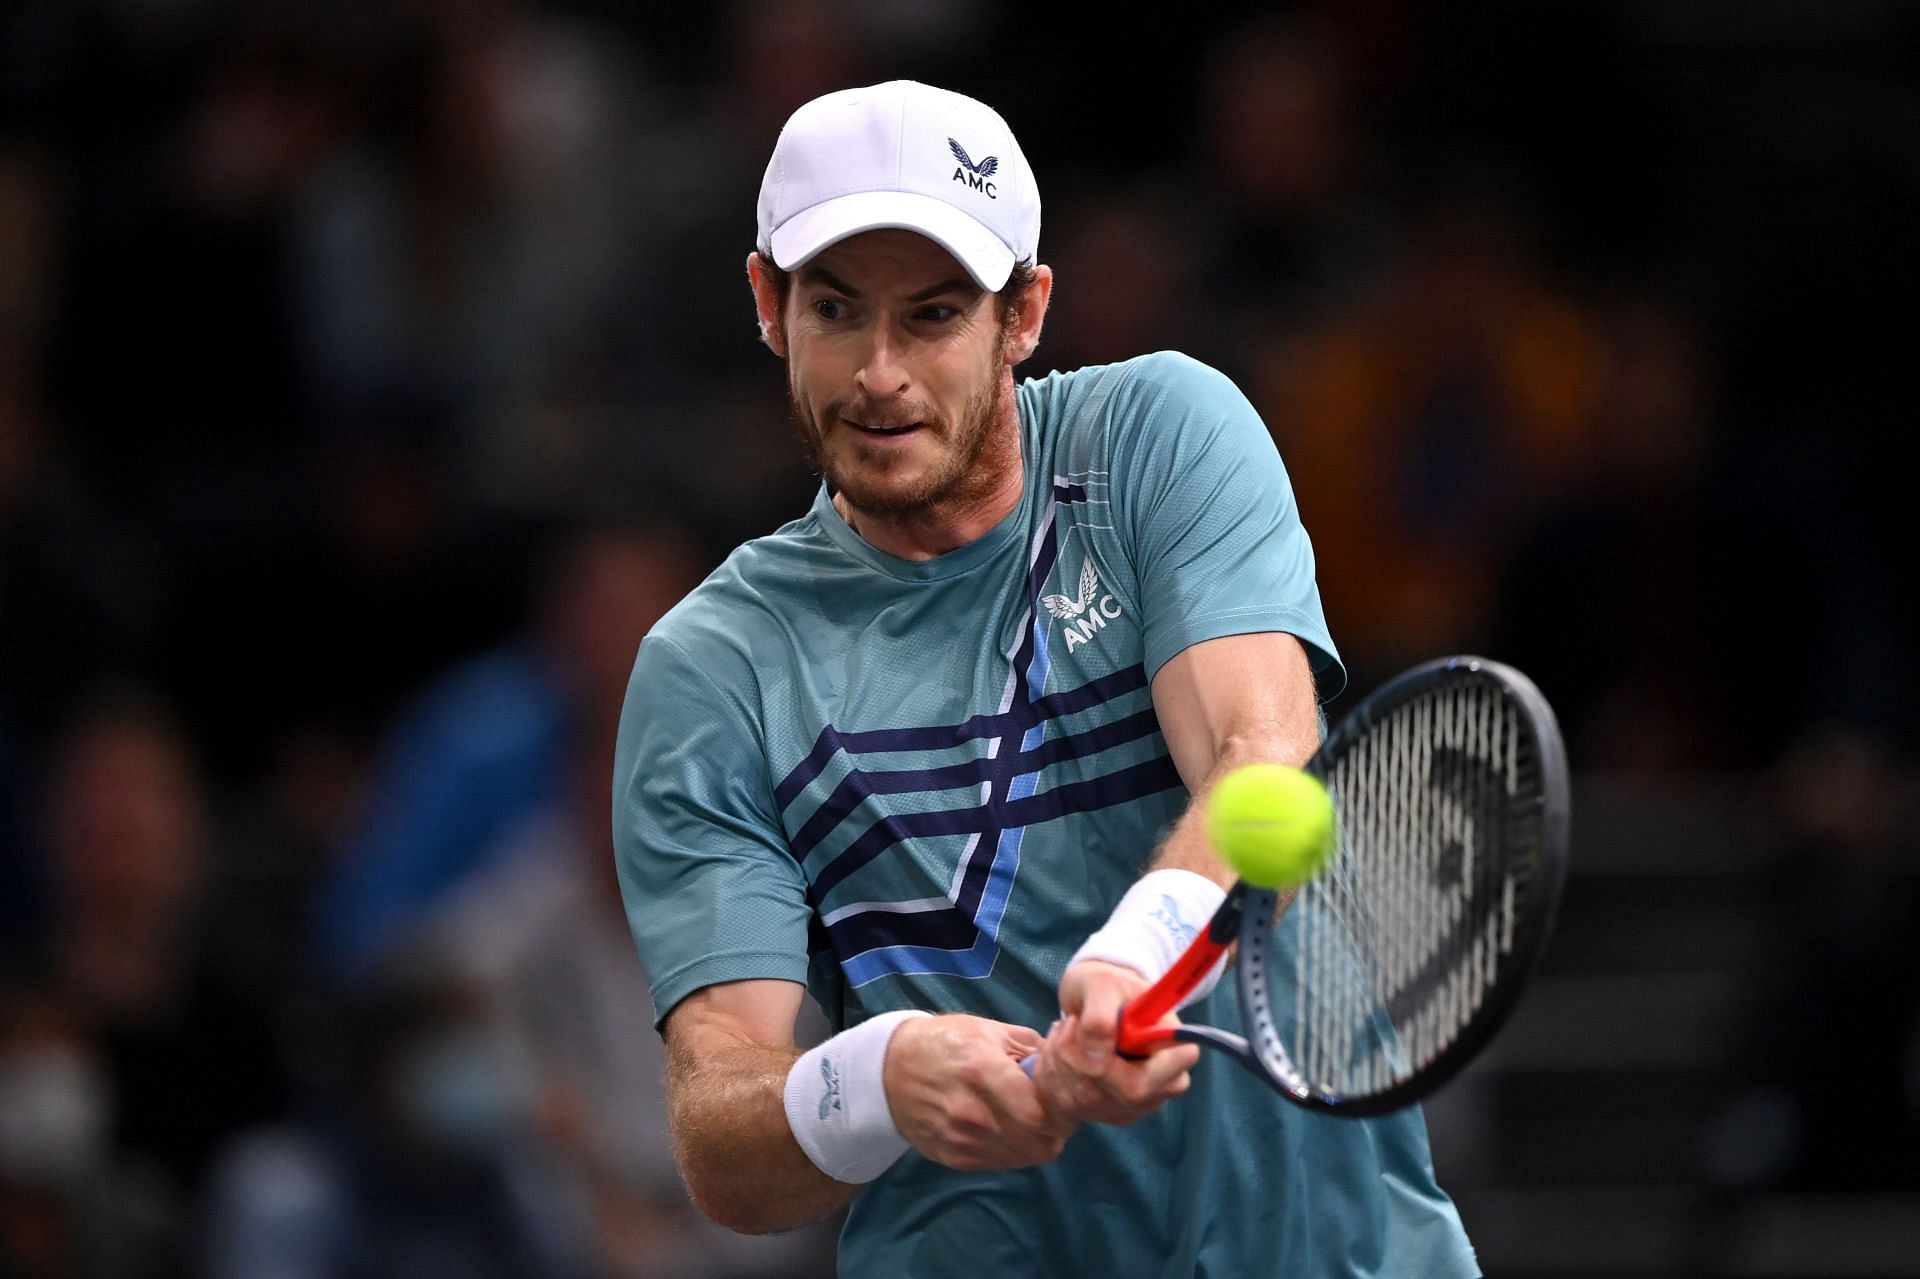 Andy Murray at the 2021 Paris Masters.